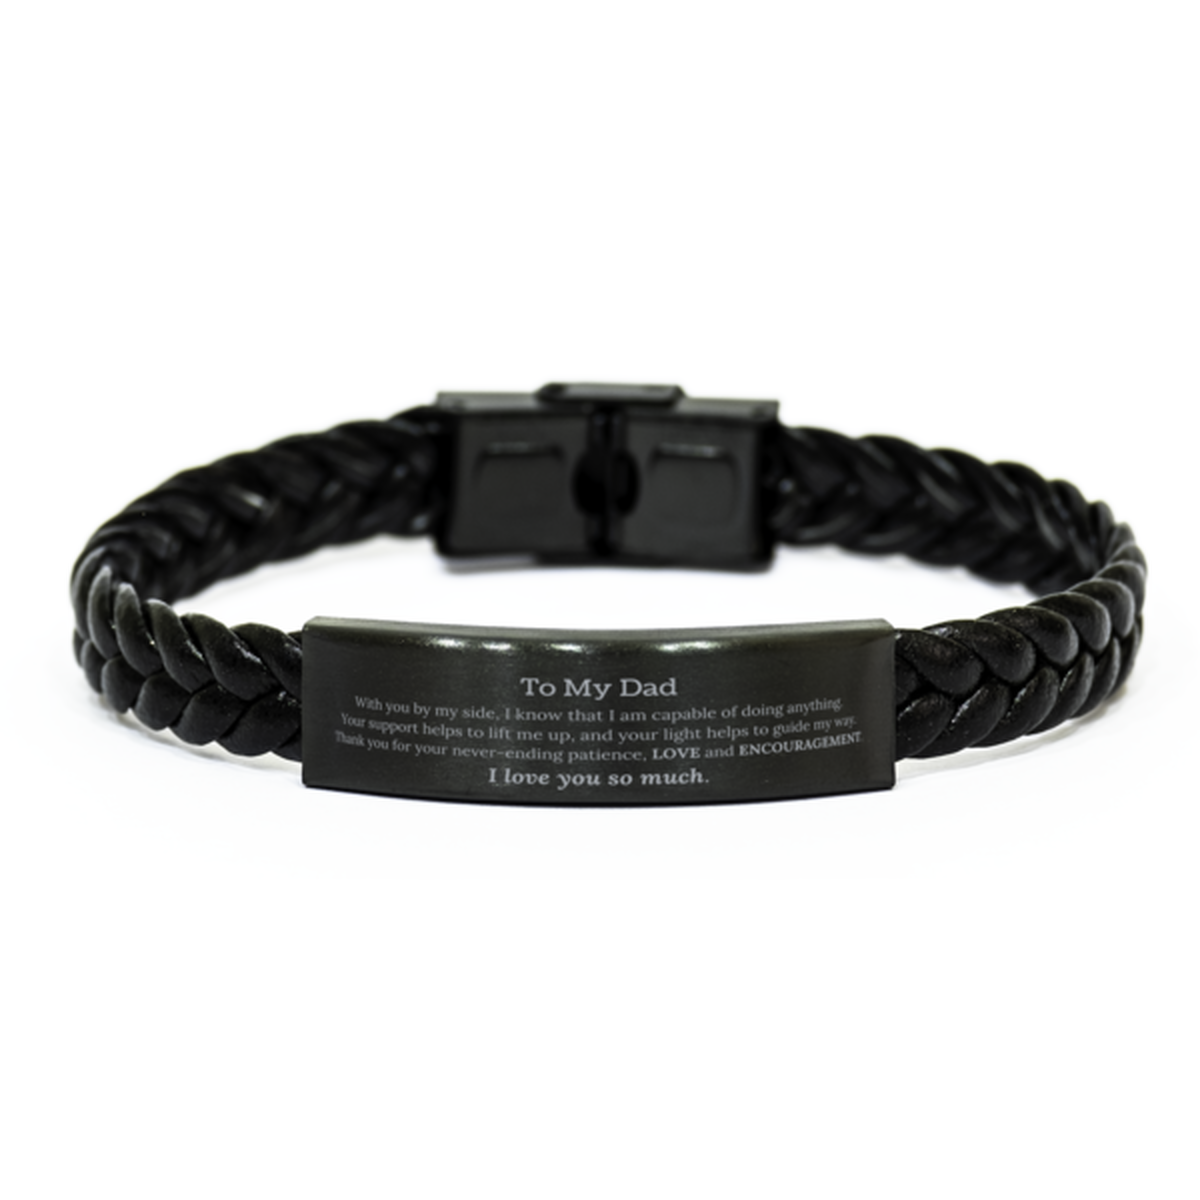 Appreciation Dad Braided Leather Bracelet Gifts, To My Dad Birthday Christmas Wedding Keepsake Gifts for Dad With you by my side, I know that I am capable of doing anything. I love you so much